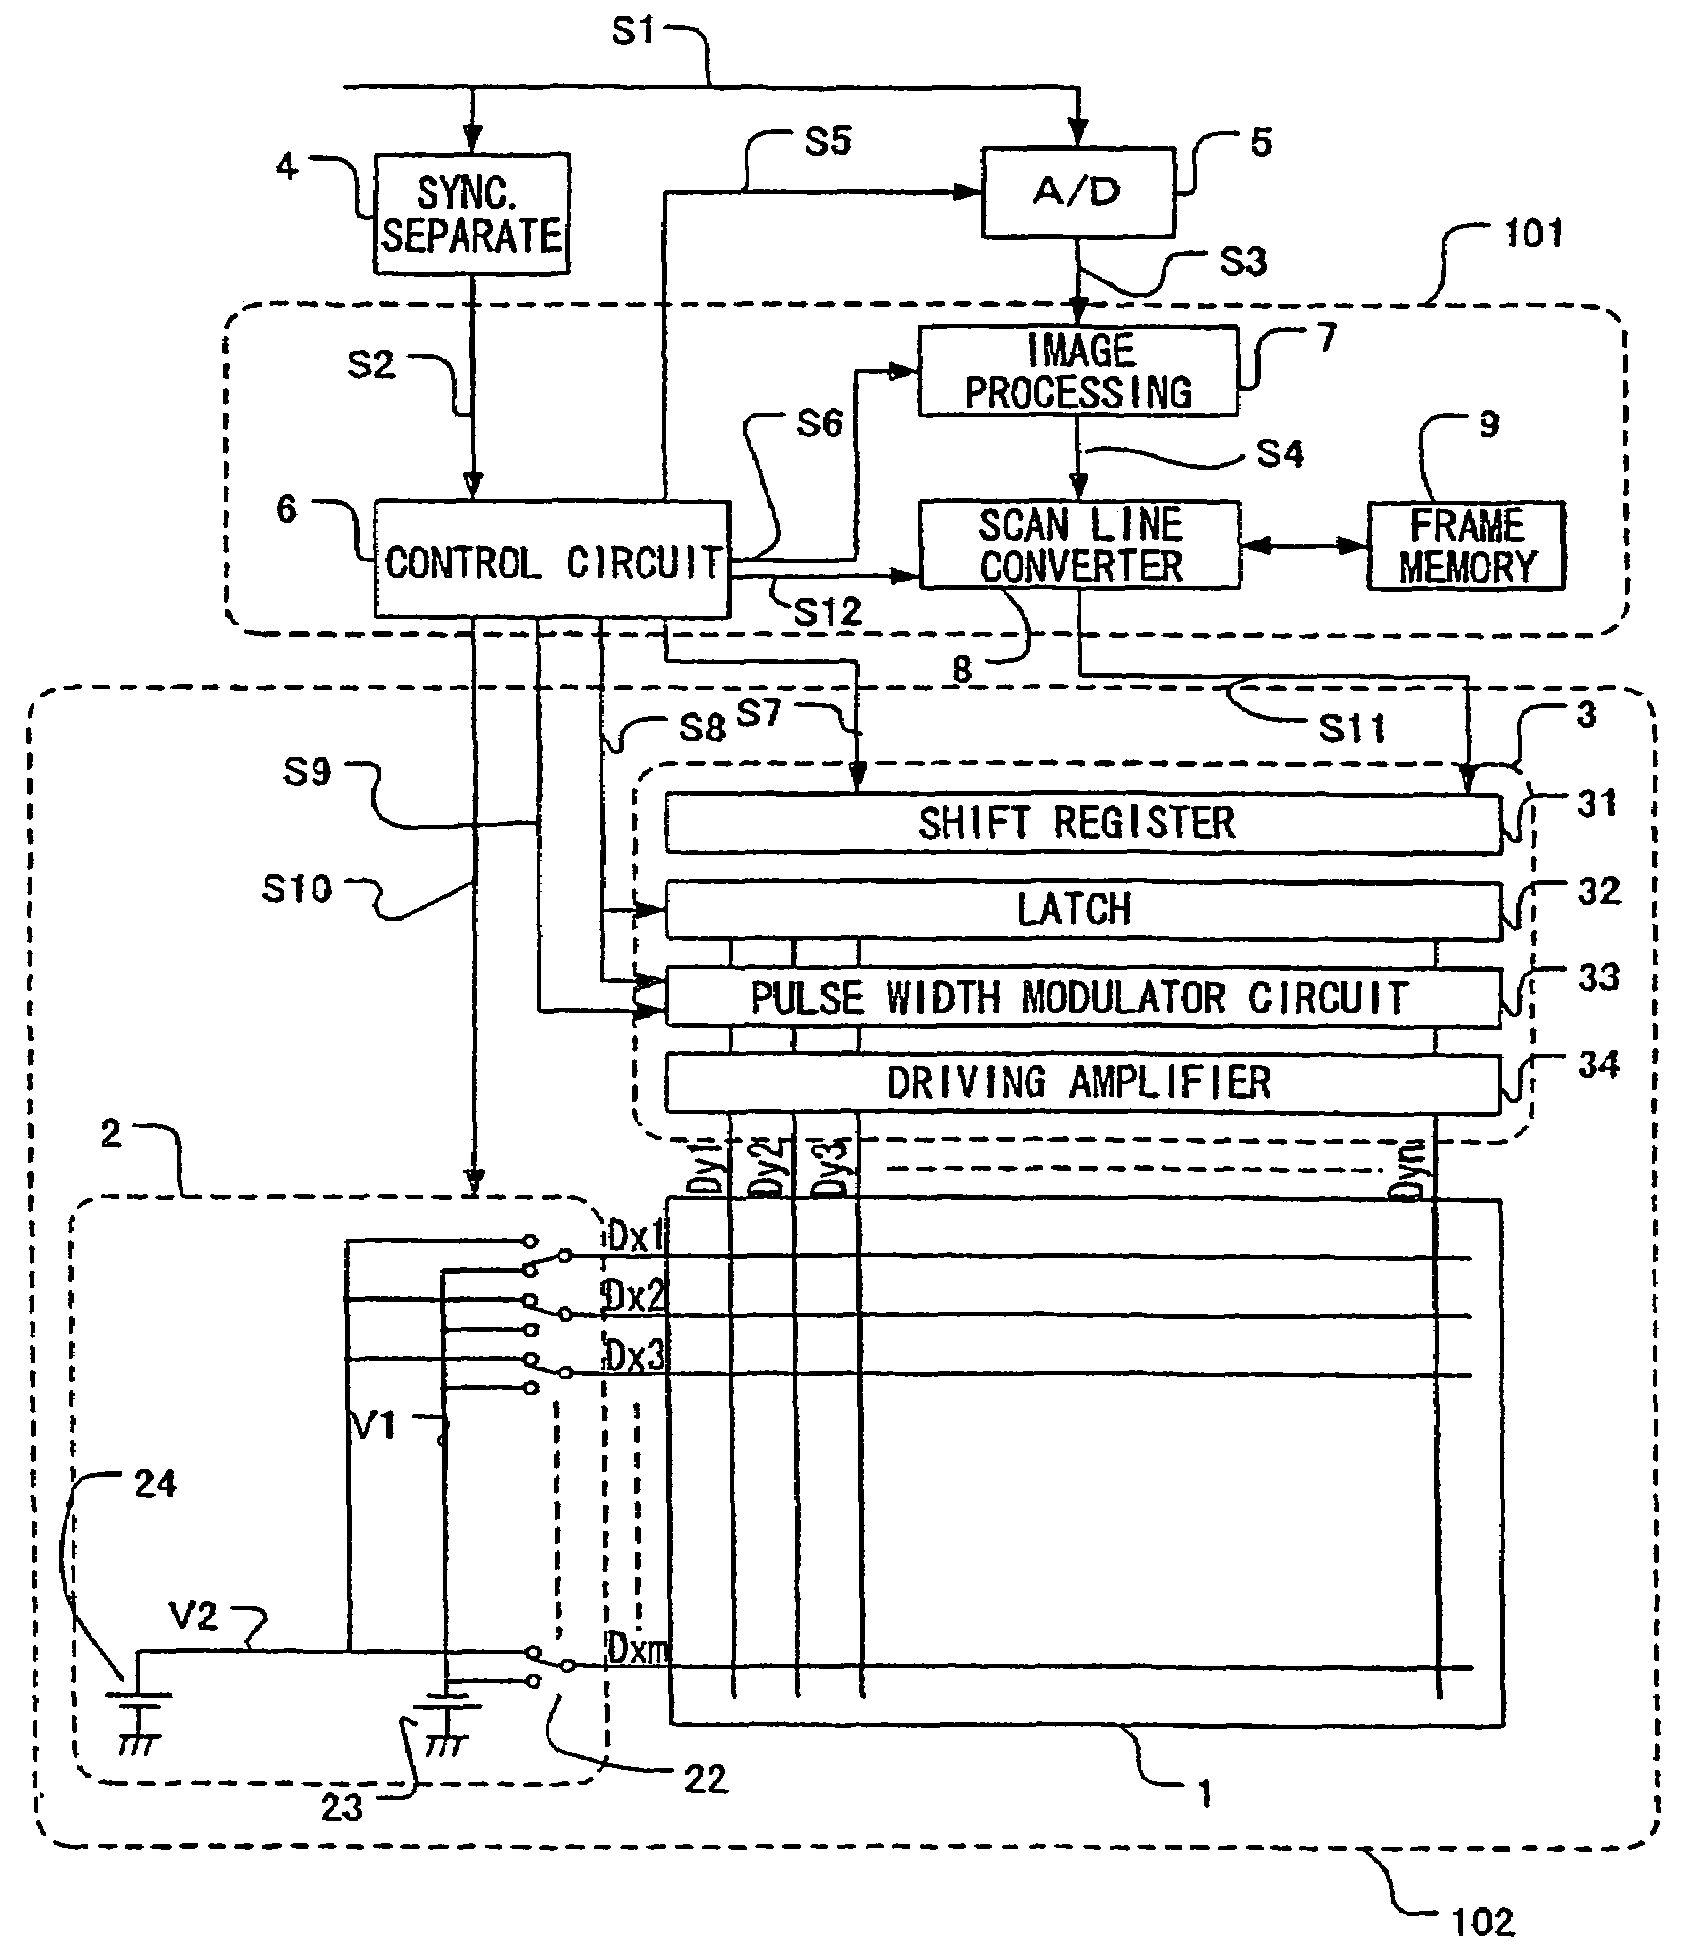 Image forming apparatus and video receiving and display apparatus